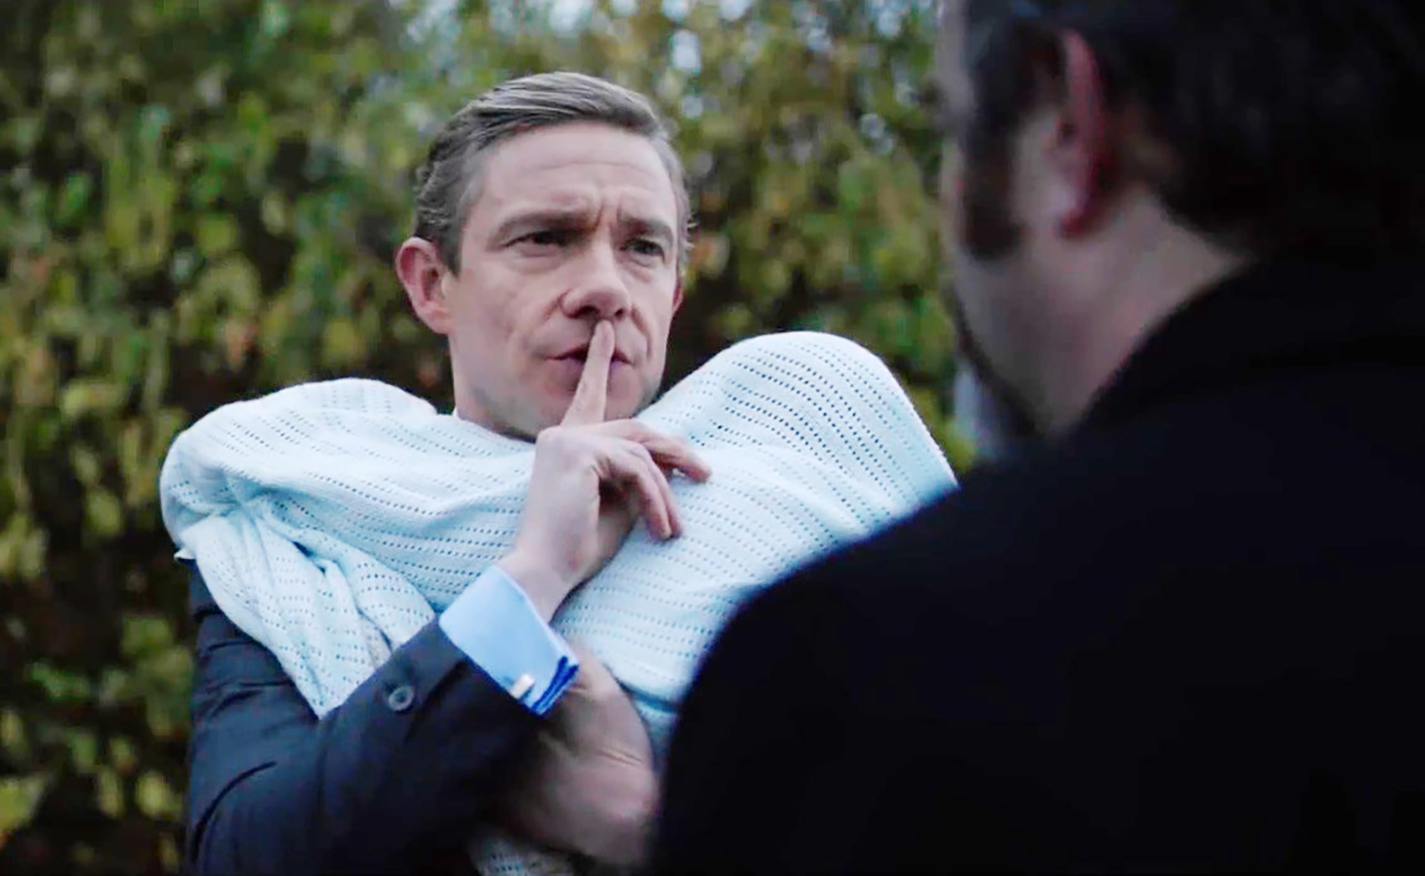 Mike Priddle, a businessman played by Martin Freeman, questions the motives and past of Professor Goodman, played by Andy Nyman. The conversation occurs during Priddle’s story in the anthology horror film.